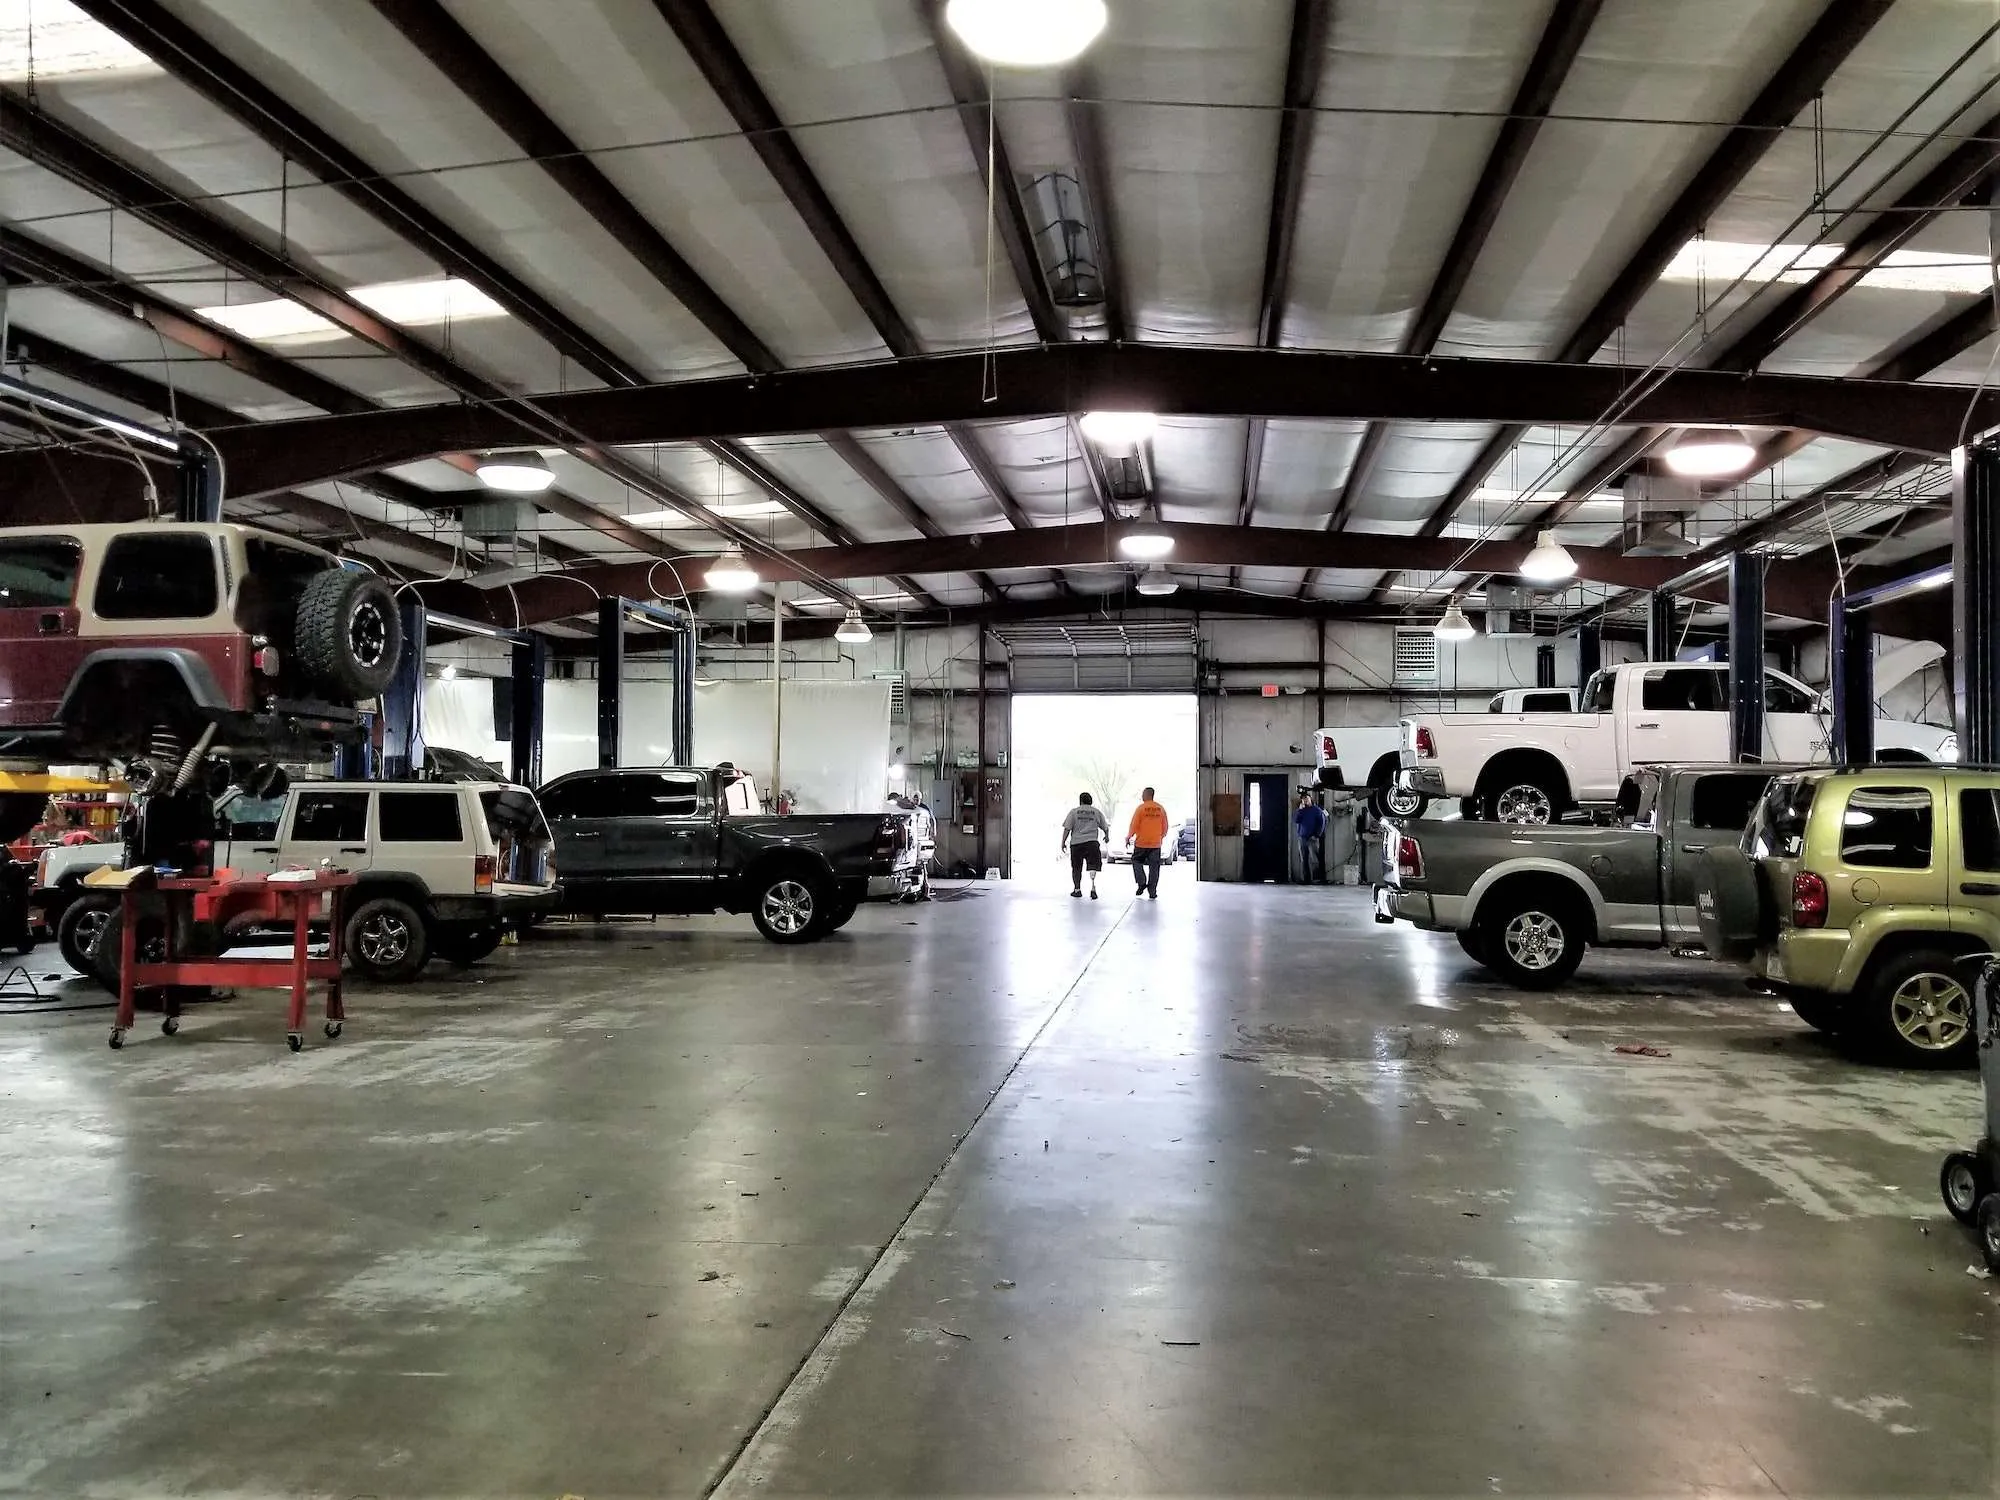 Ensure your auto garage is protected with our liability insurance, offering access to 50+ carriers for the best coverage and rates.